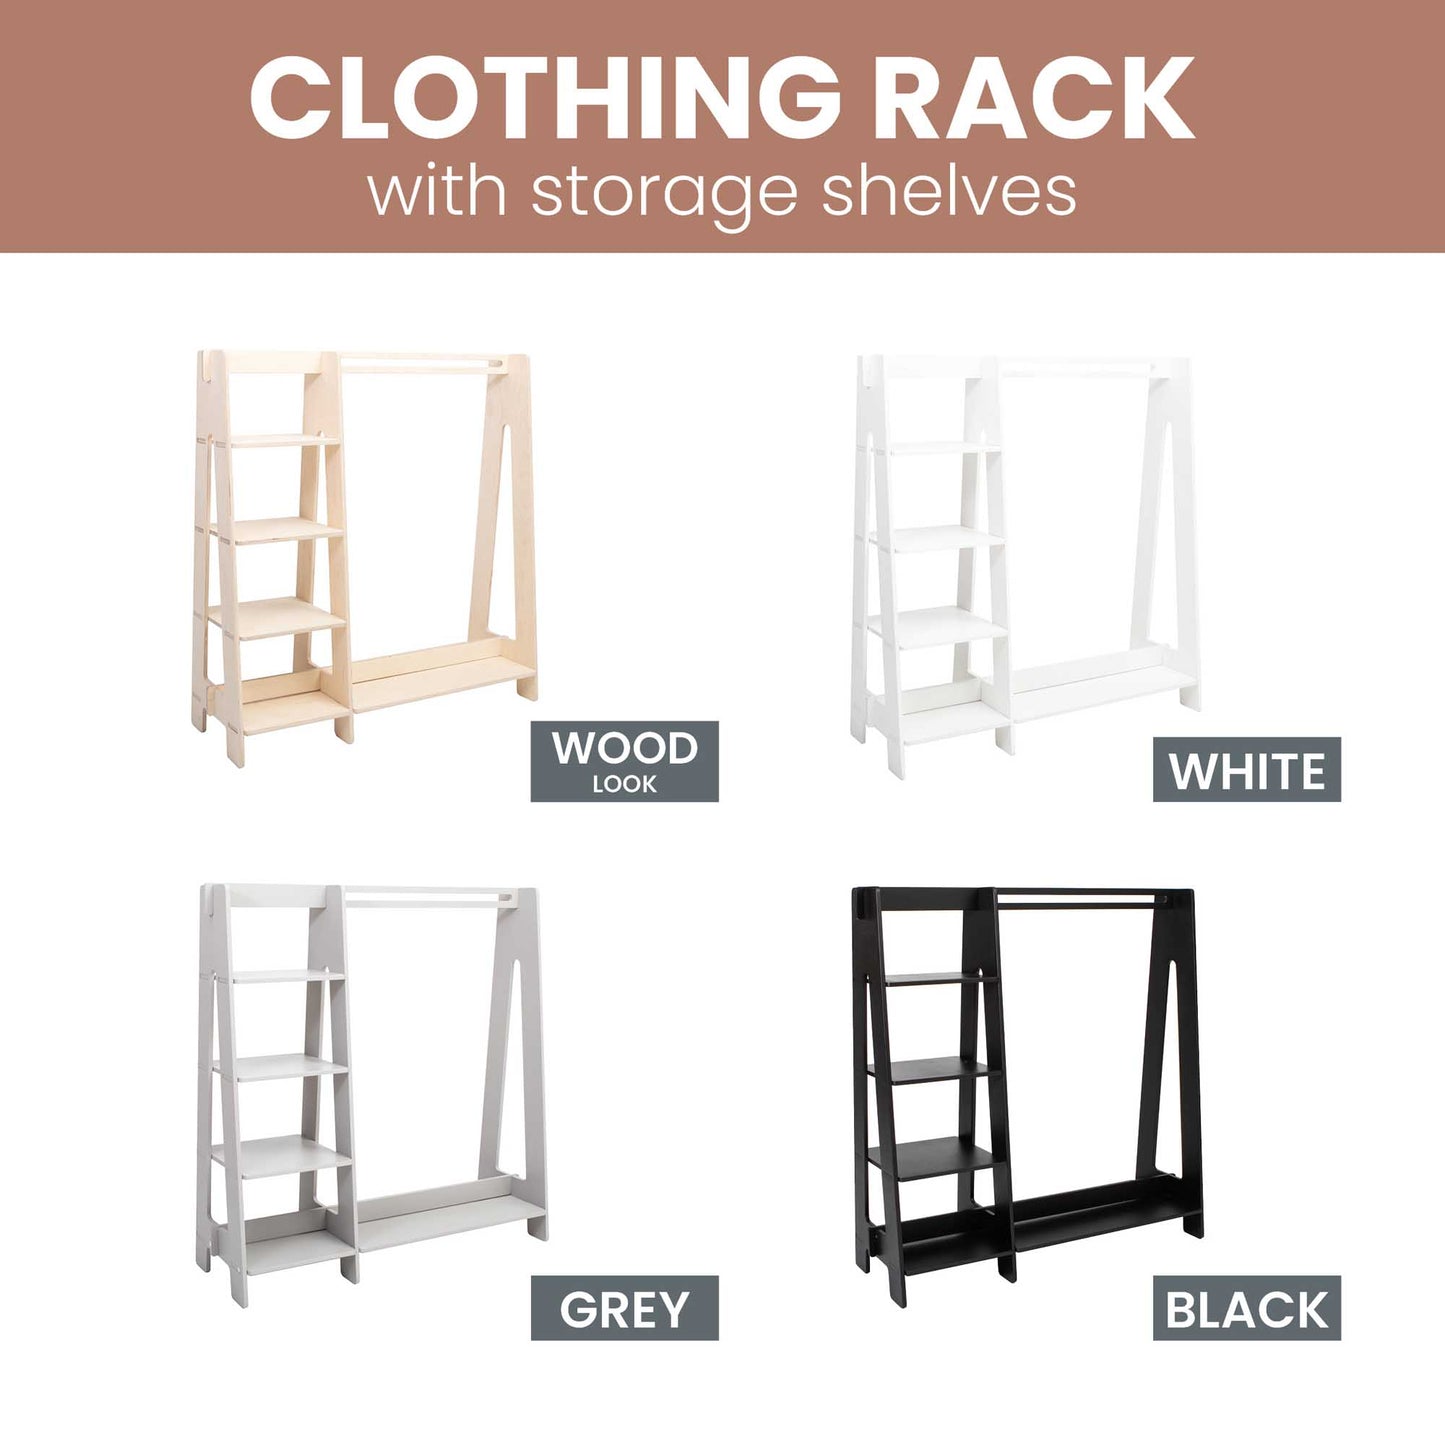 Sweet Home From Wood Children's wardrobe, dress up clothing rack with storage shelves.